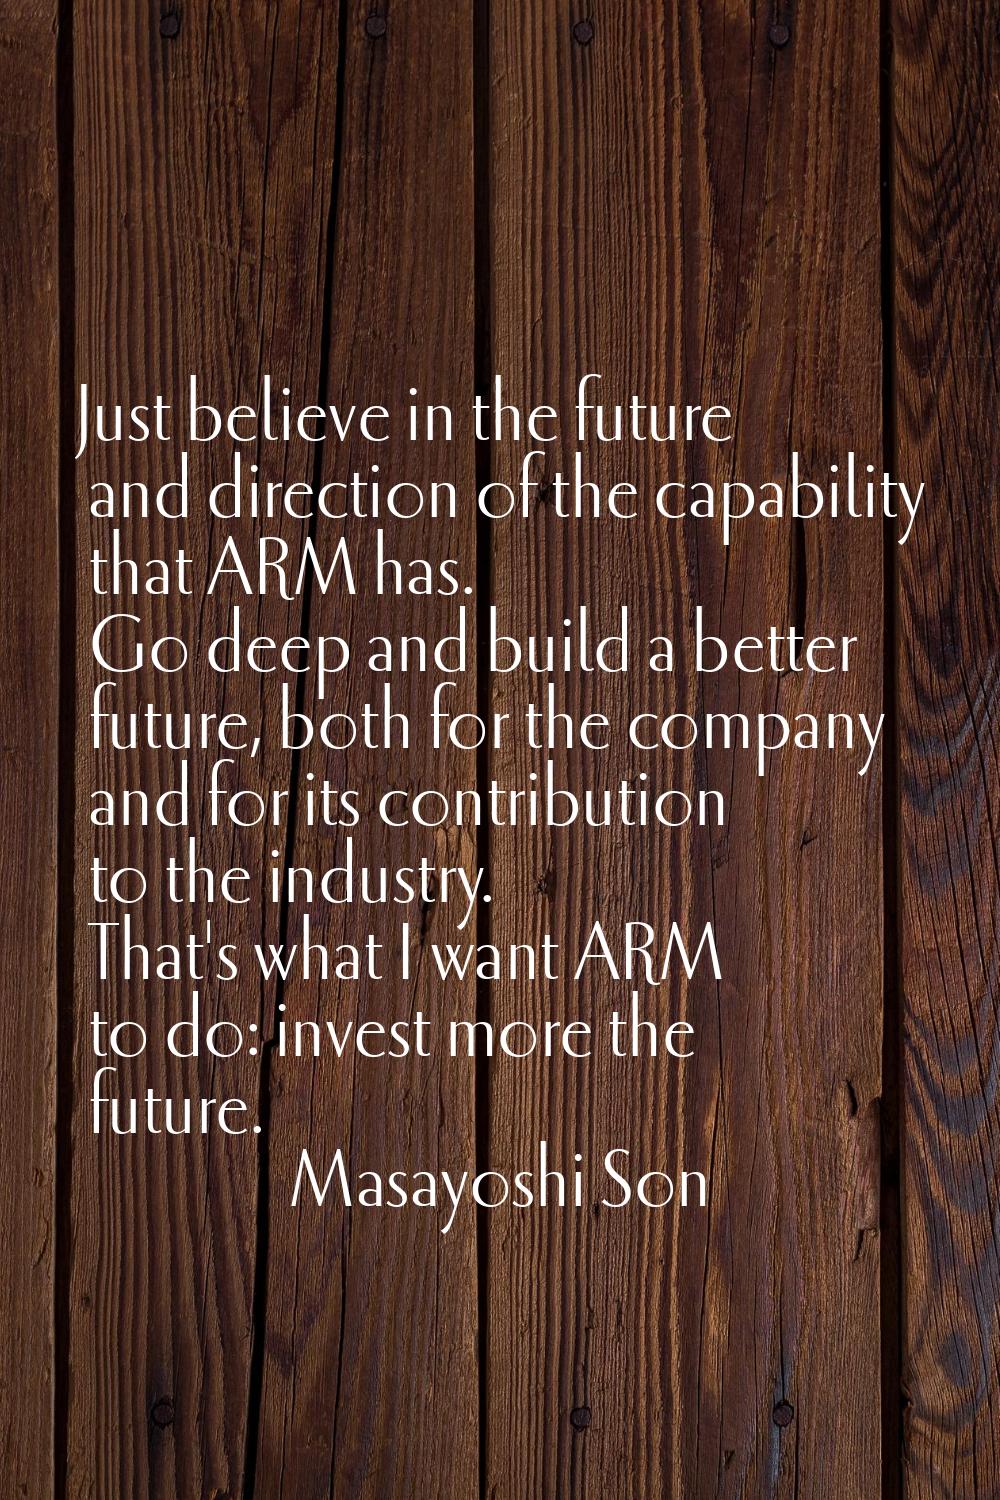 Just believe in the future and direction of the capability that ARM has. Go deep and build a better